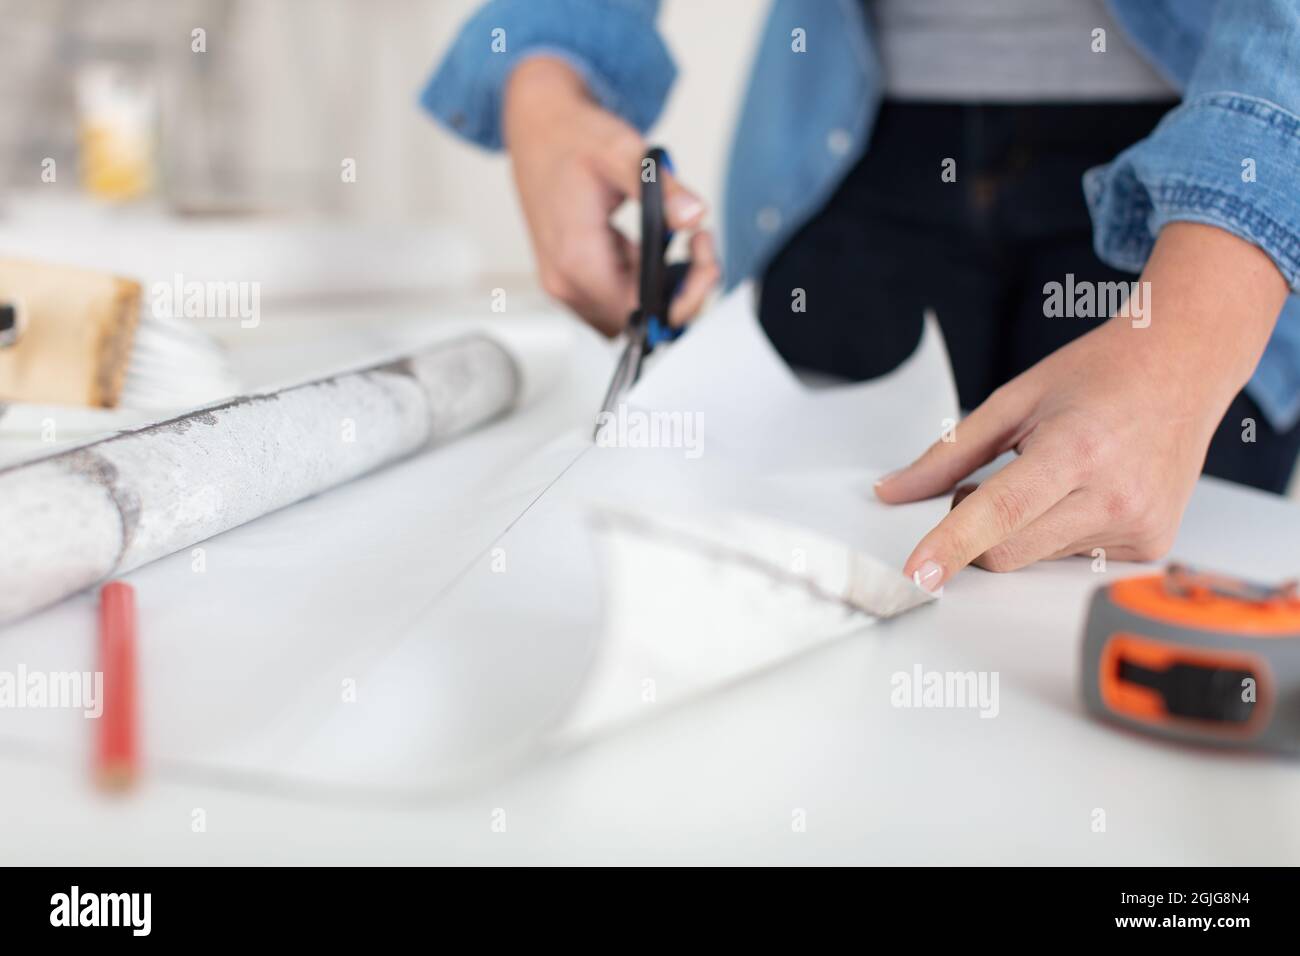 close up woman using scissors at home Stock Photo